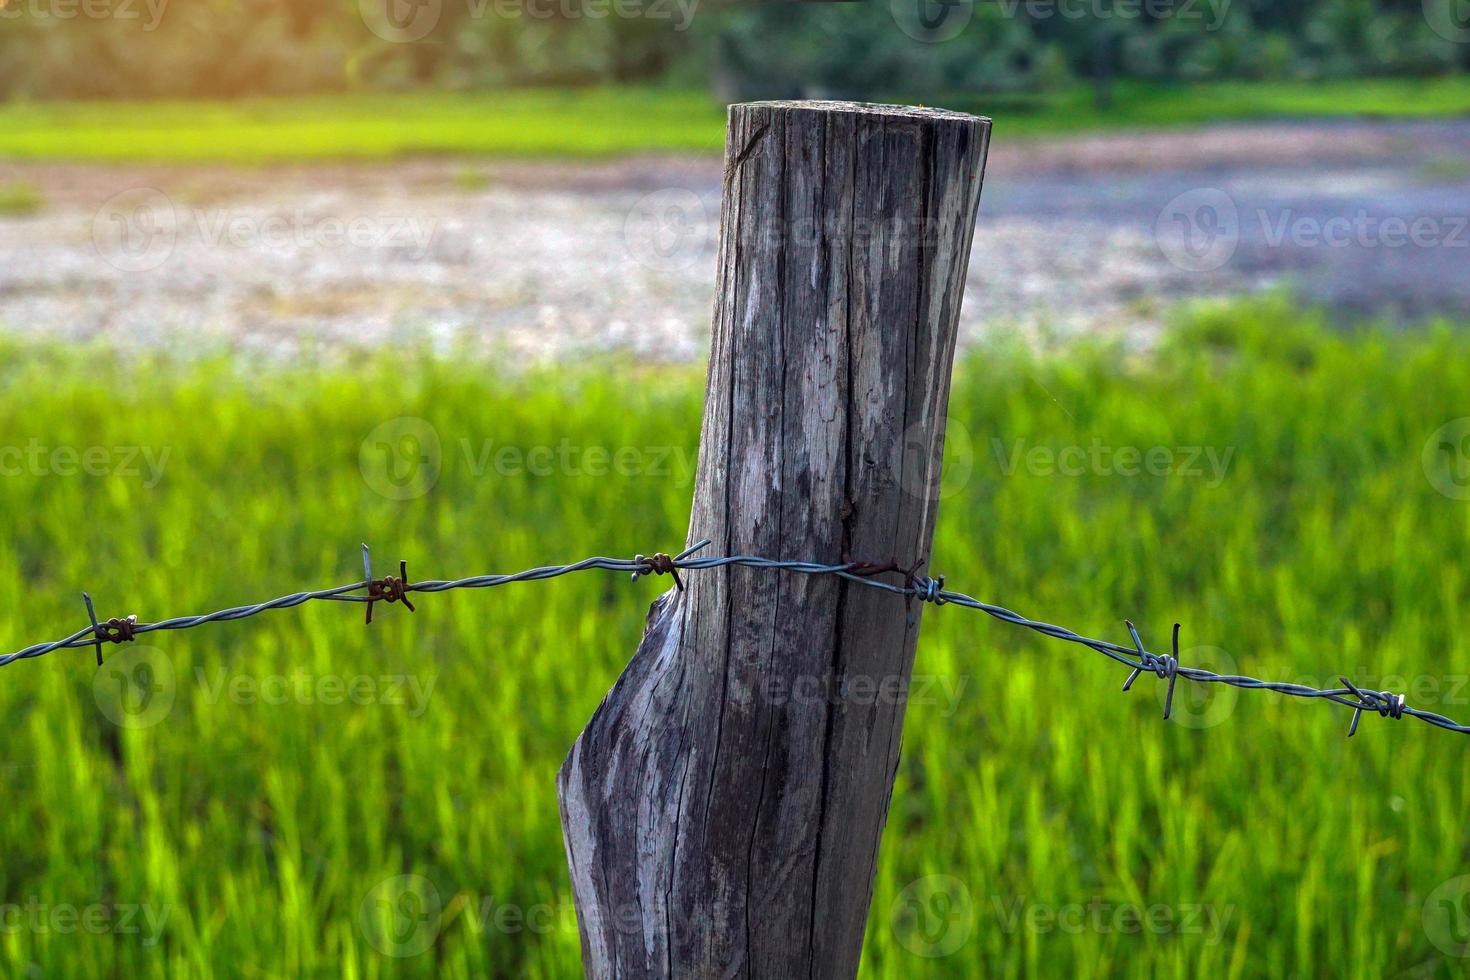 barbed wires are wires that are knotted at regular intervals. Each knot has a sharp tip. Used to make fences or obstacles. Soft and selective focus. photo